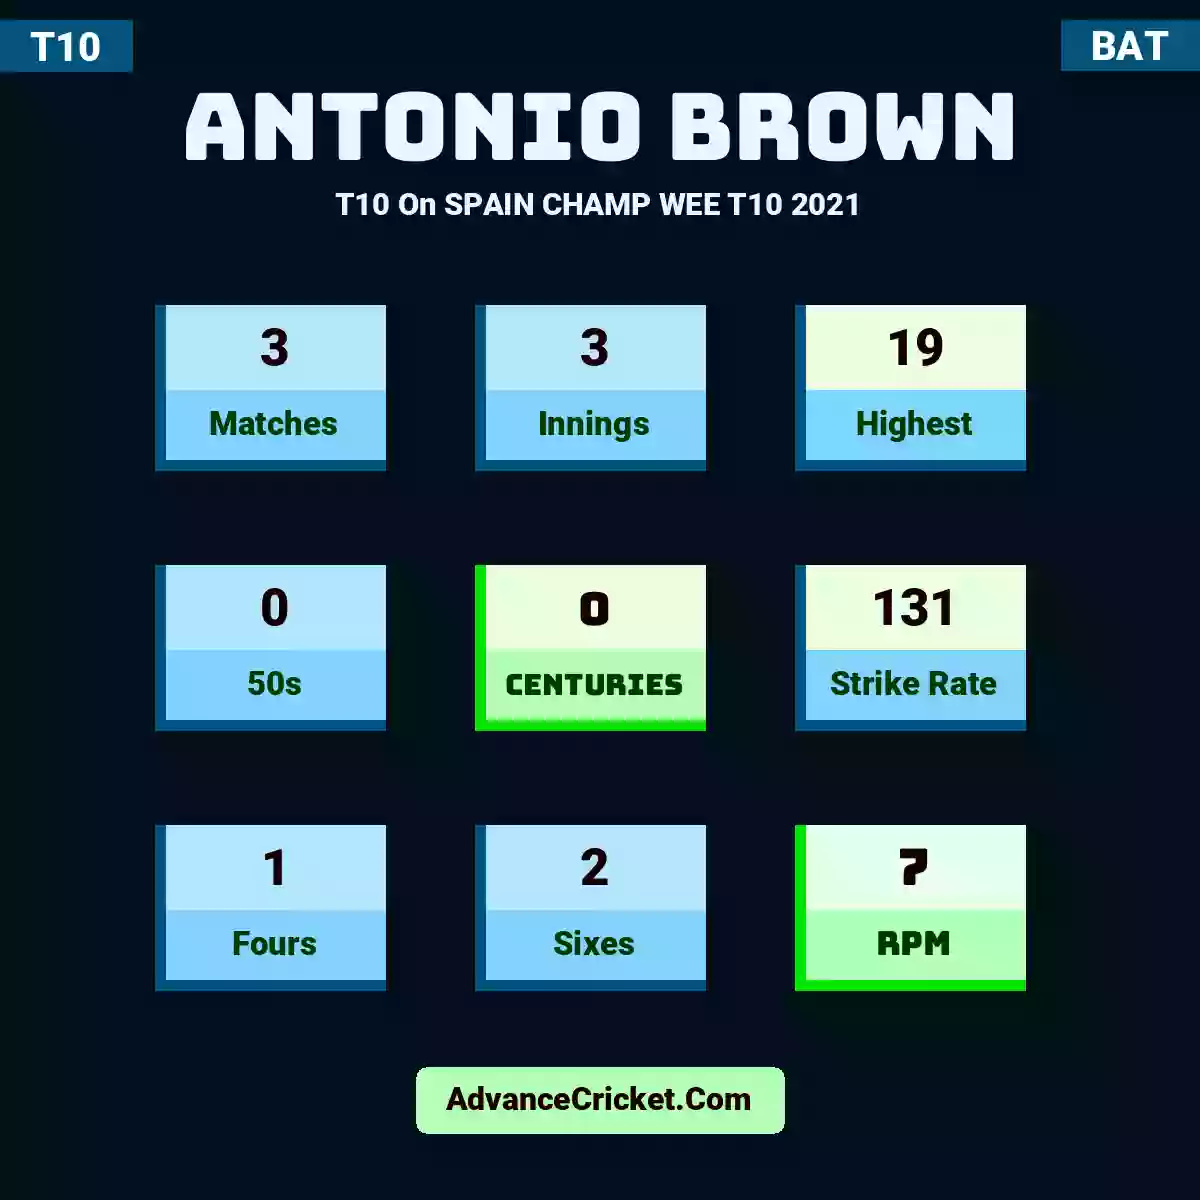 Antonio Brown T10  On SPAIN CHAMP WEE T10 2021, Antonio Brown played 3 matches, scored 19 runs as highest, 0 half-centuries, and 0 centuries, with a strike rate of 131. A.Brown hit 1 fours and 2 sixes, with an RPM of 7.